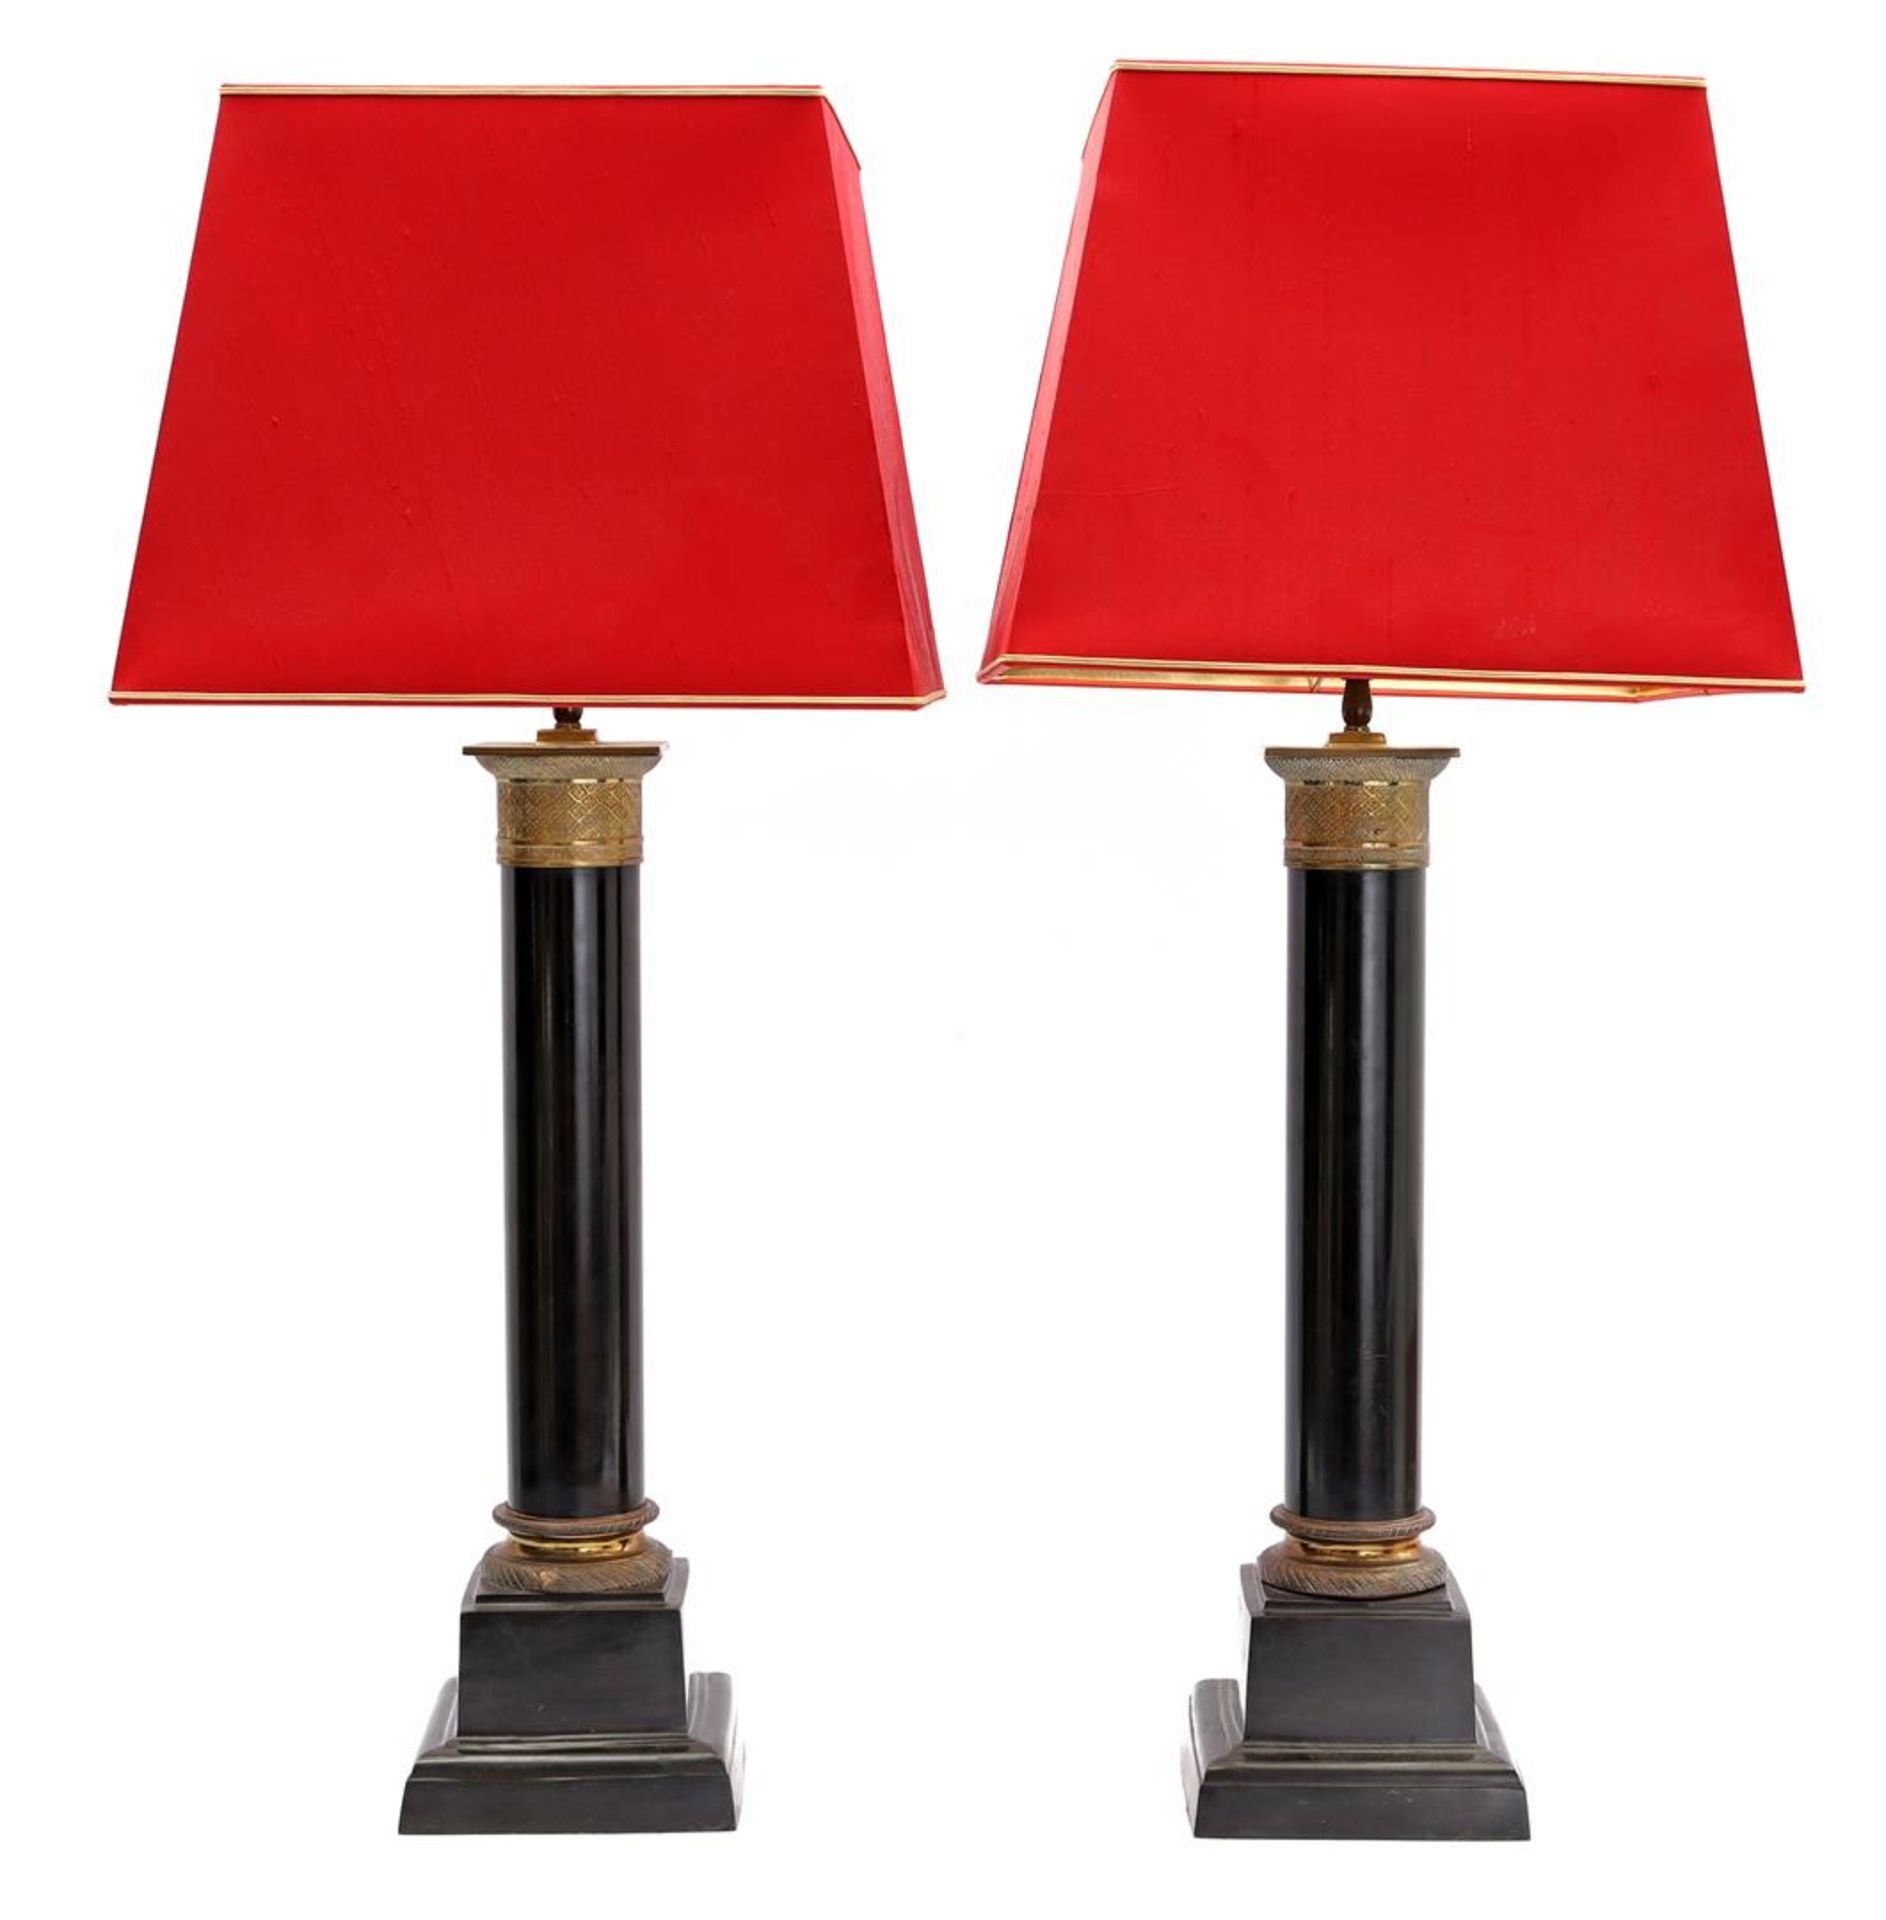 2 classic copper table lamp bases